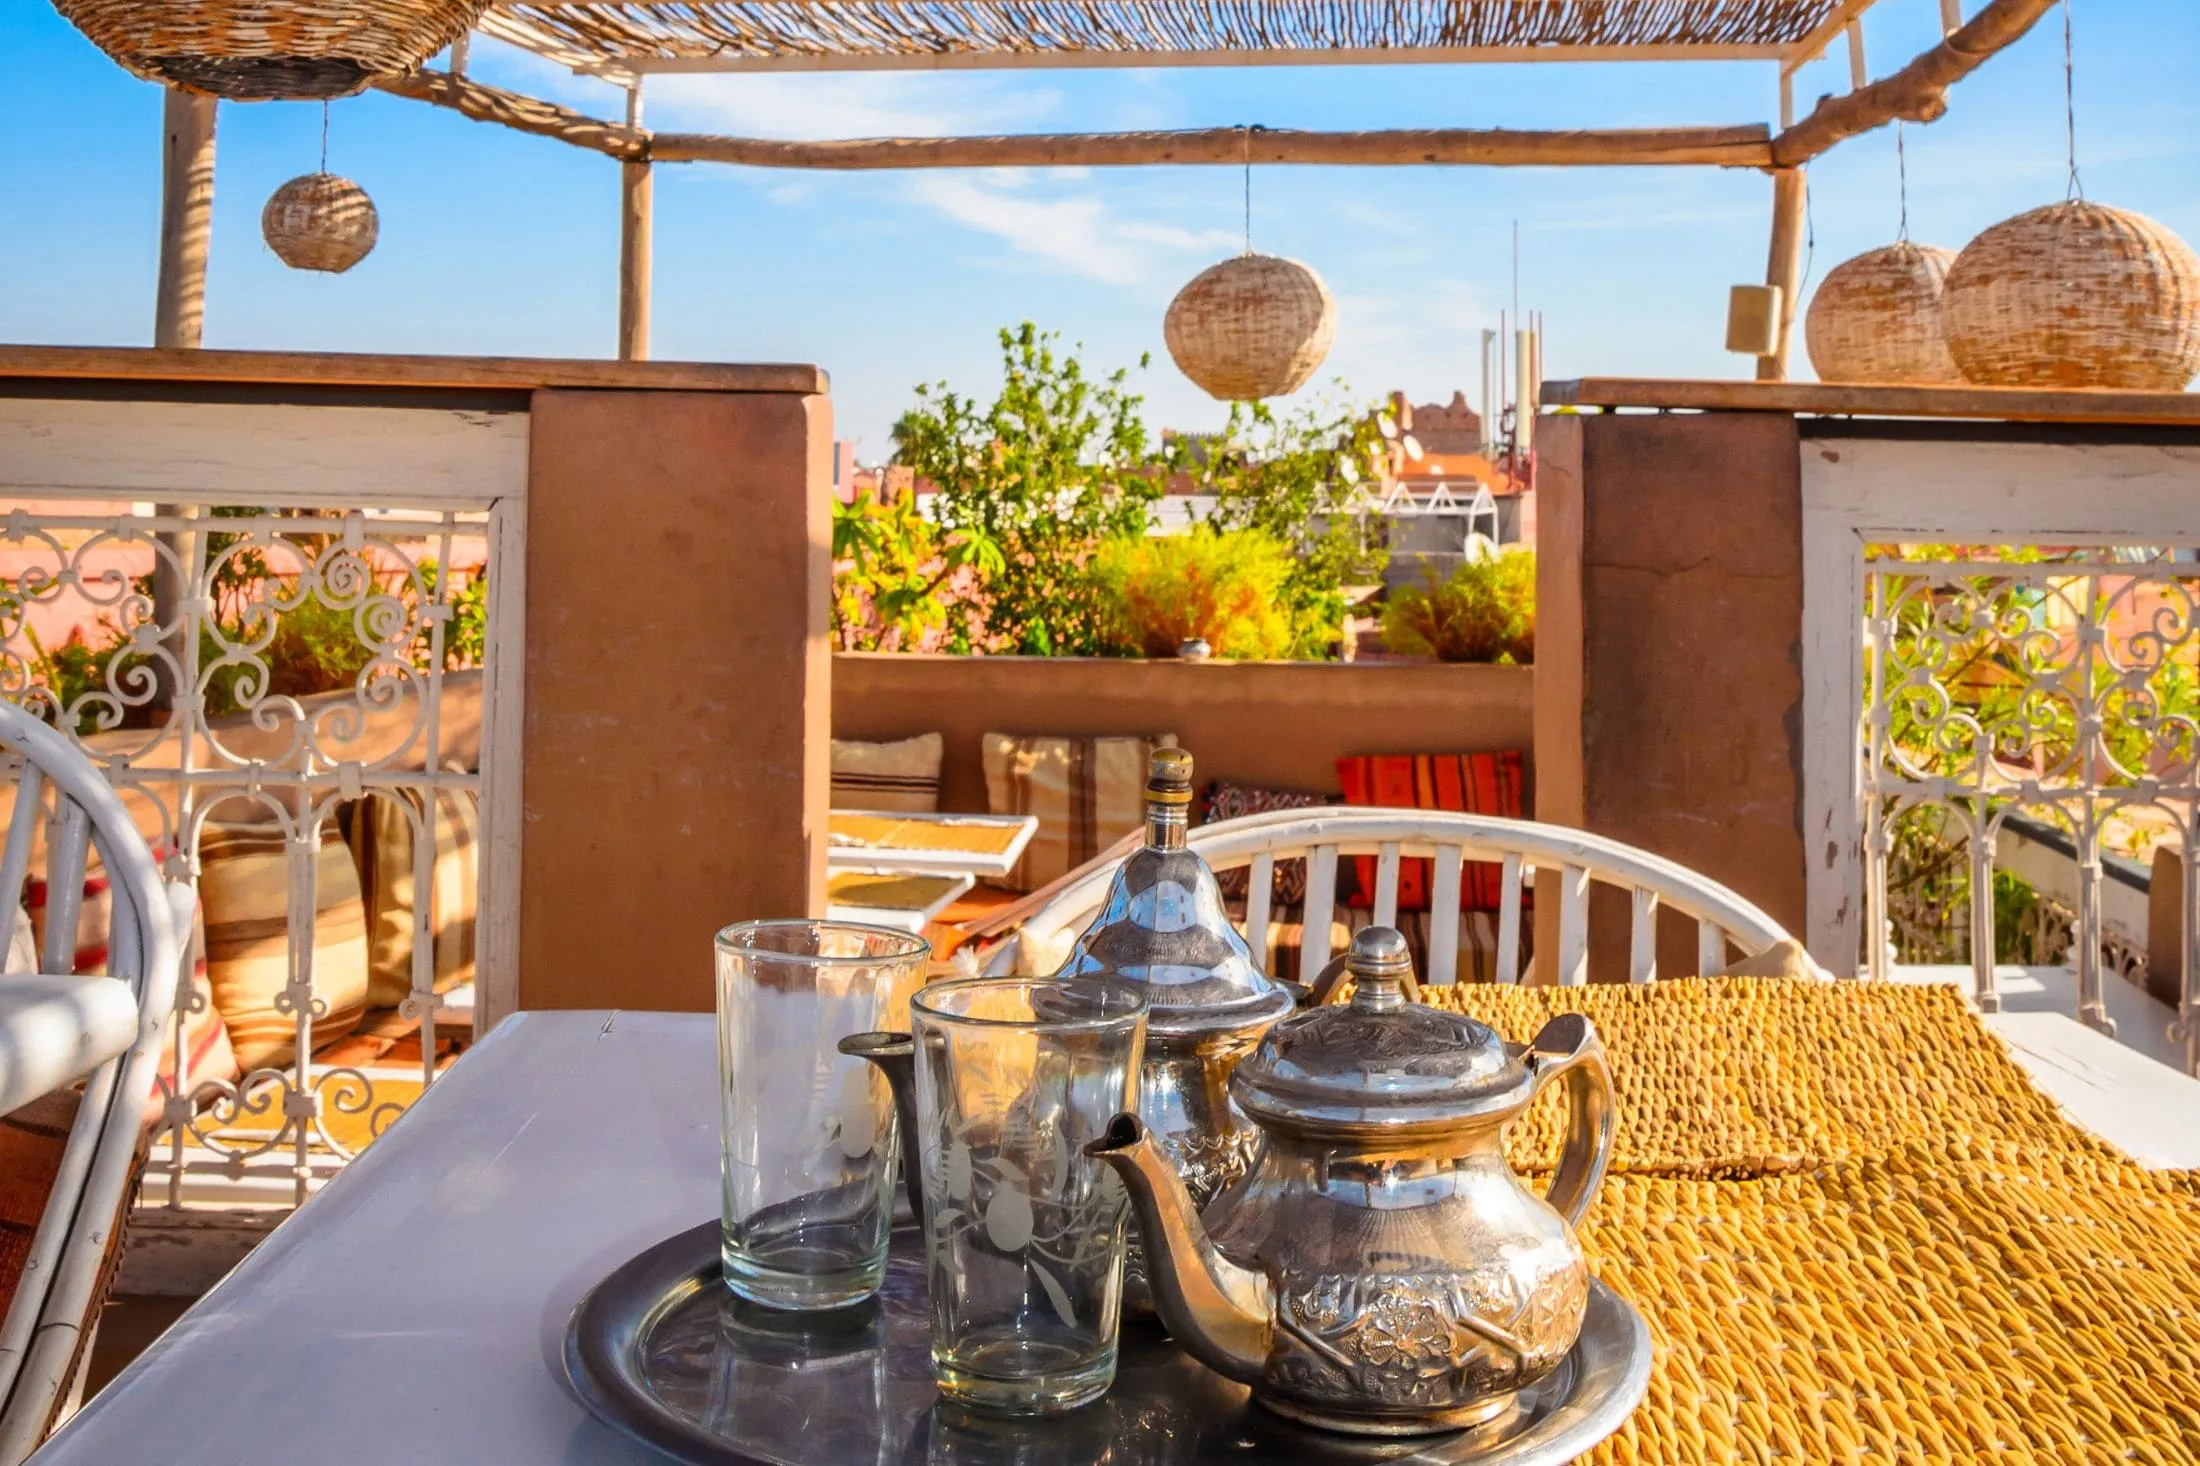 Moroccan tea with mint served on a terrace in Marrakesh